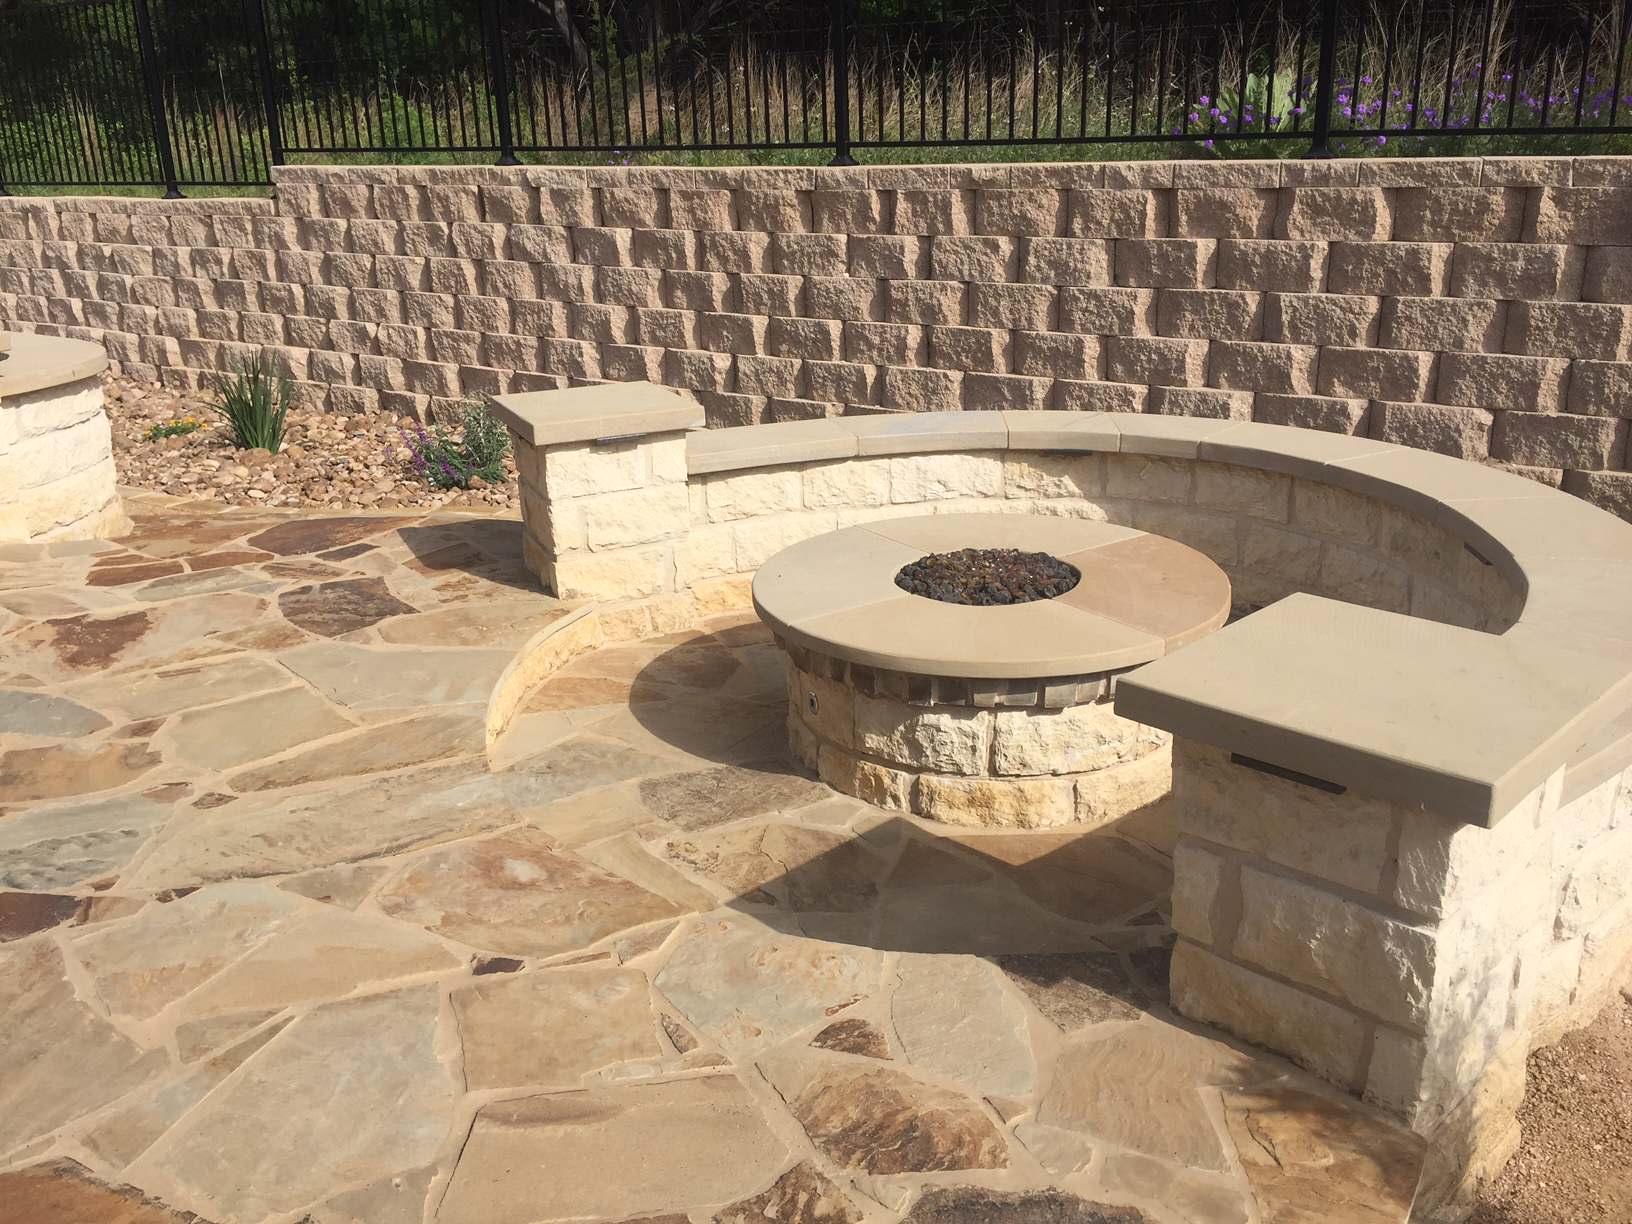 Flagstone patio w/ sunken gas fire pit and seating area